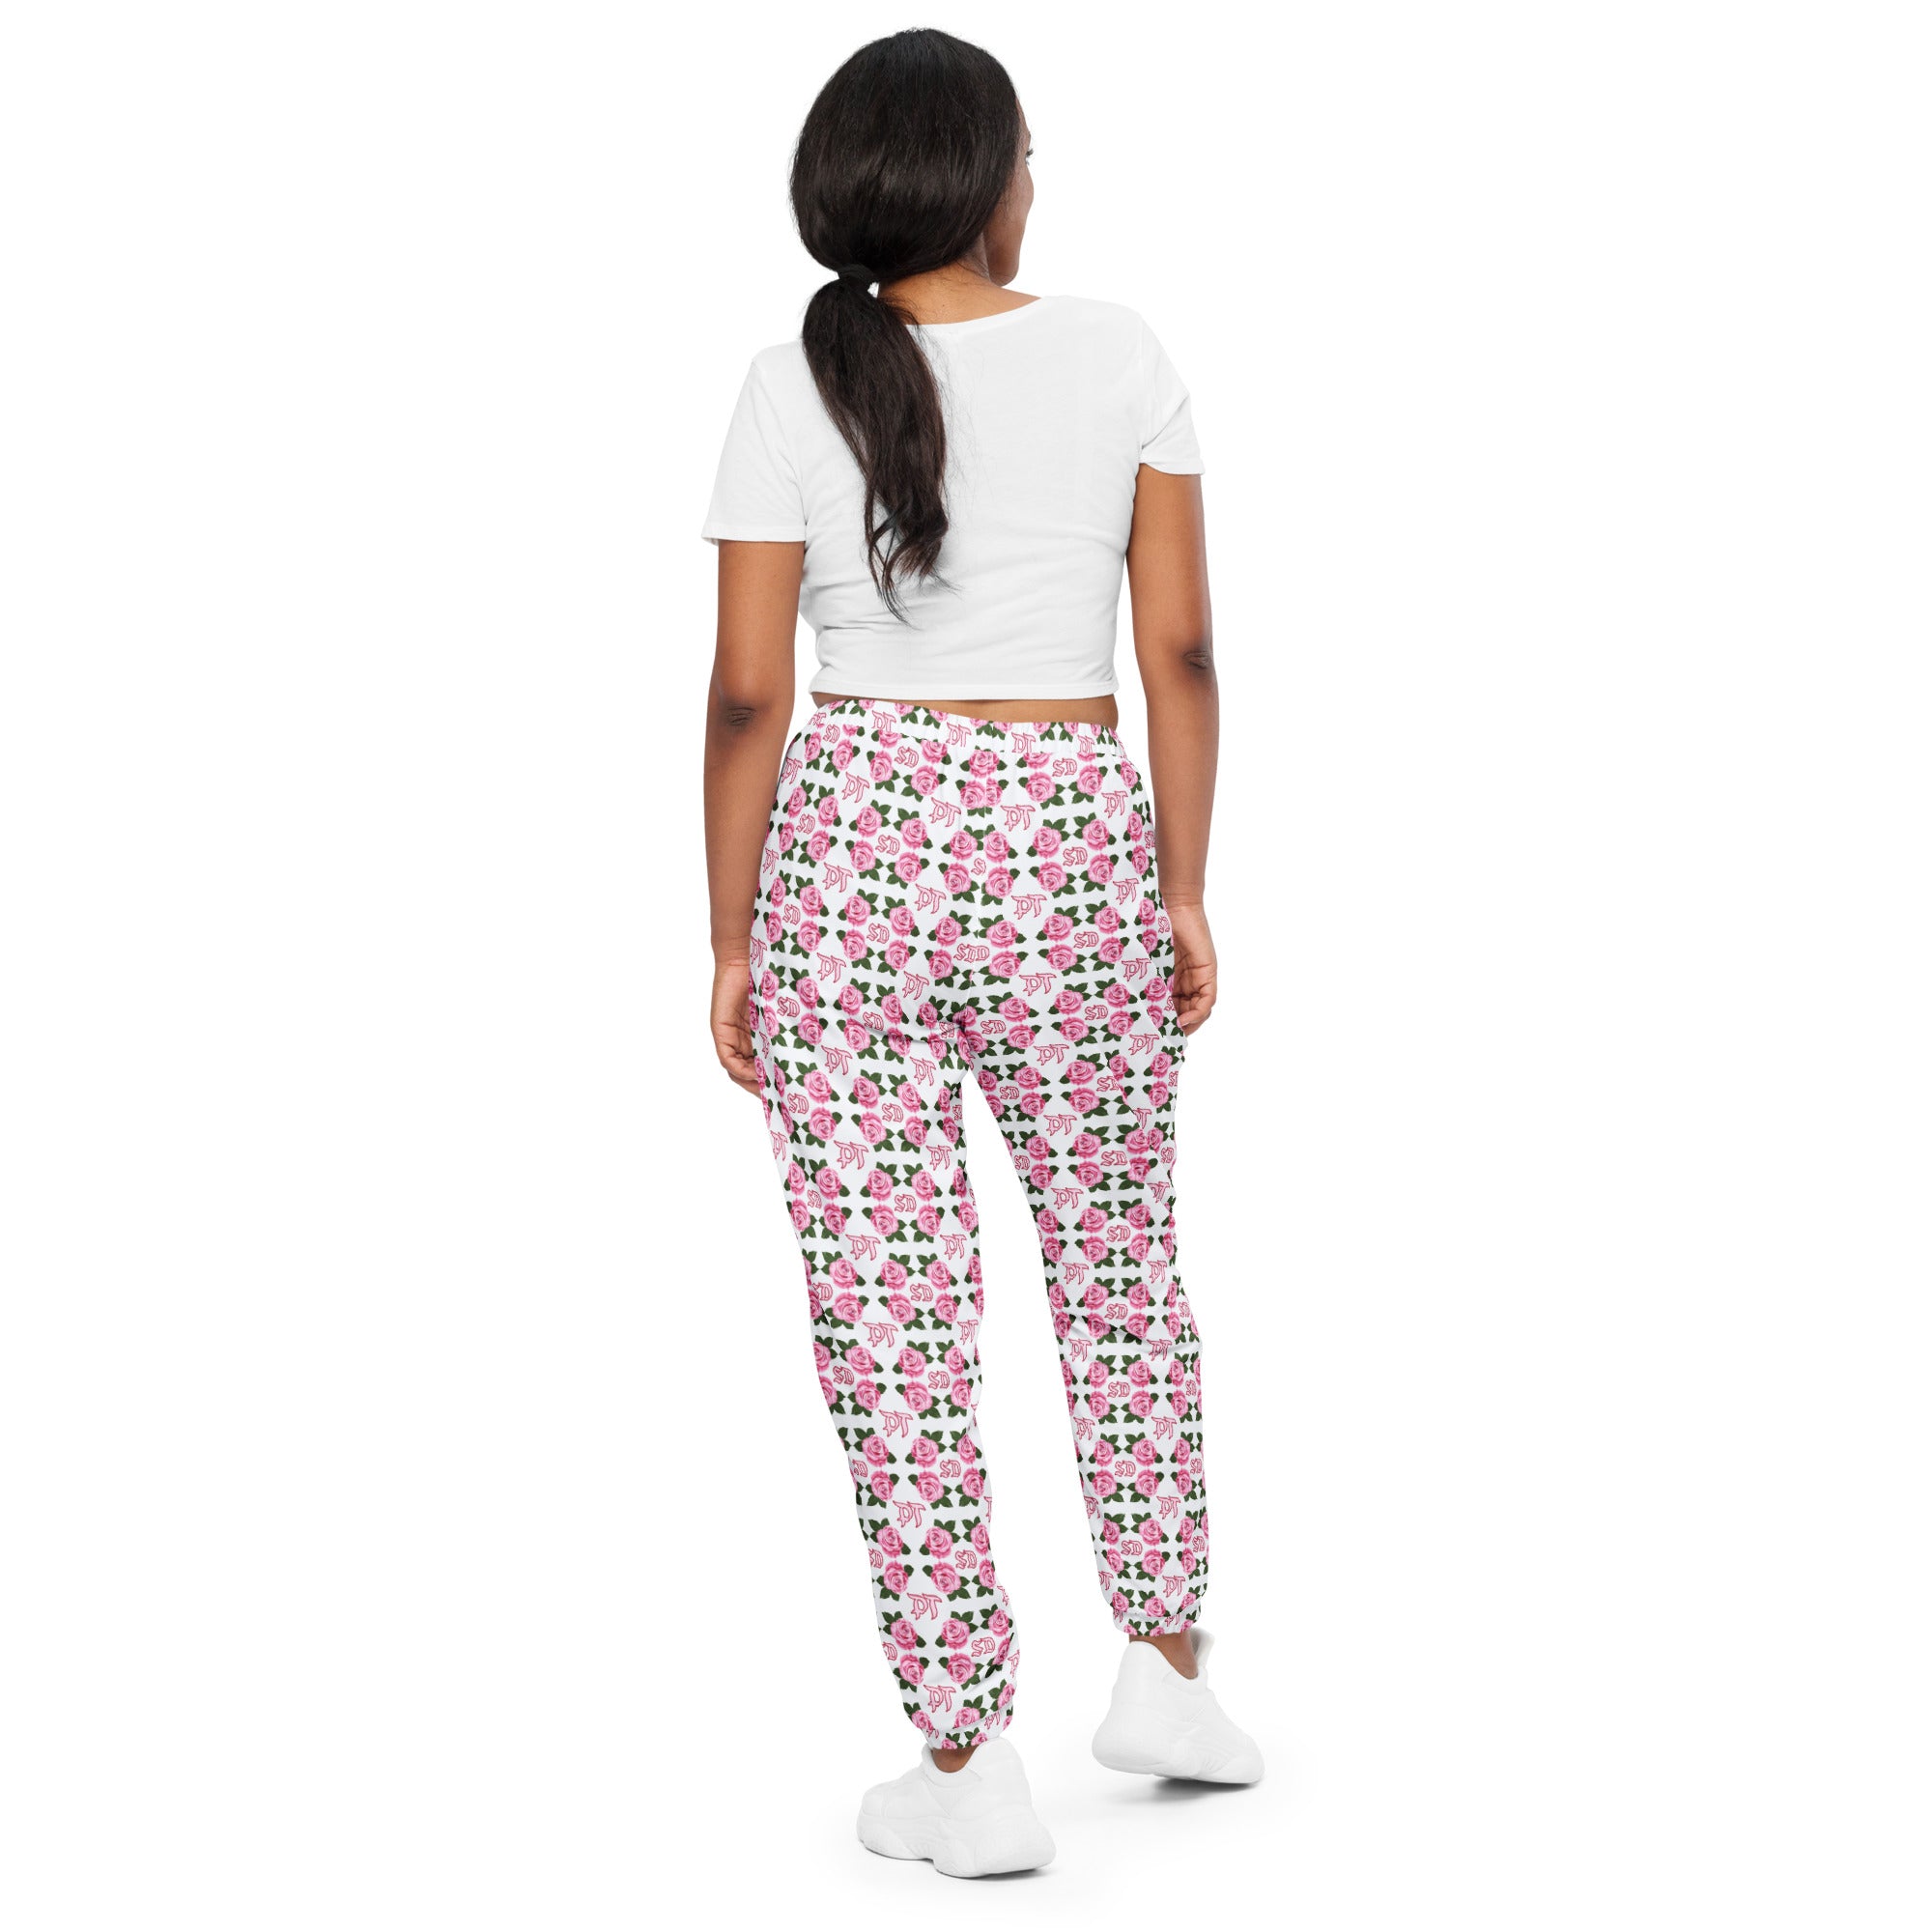 all over print unisex track pants white back 64516502ce203